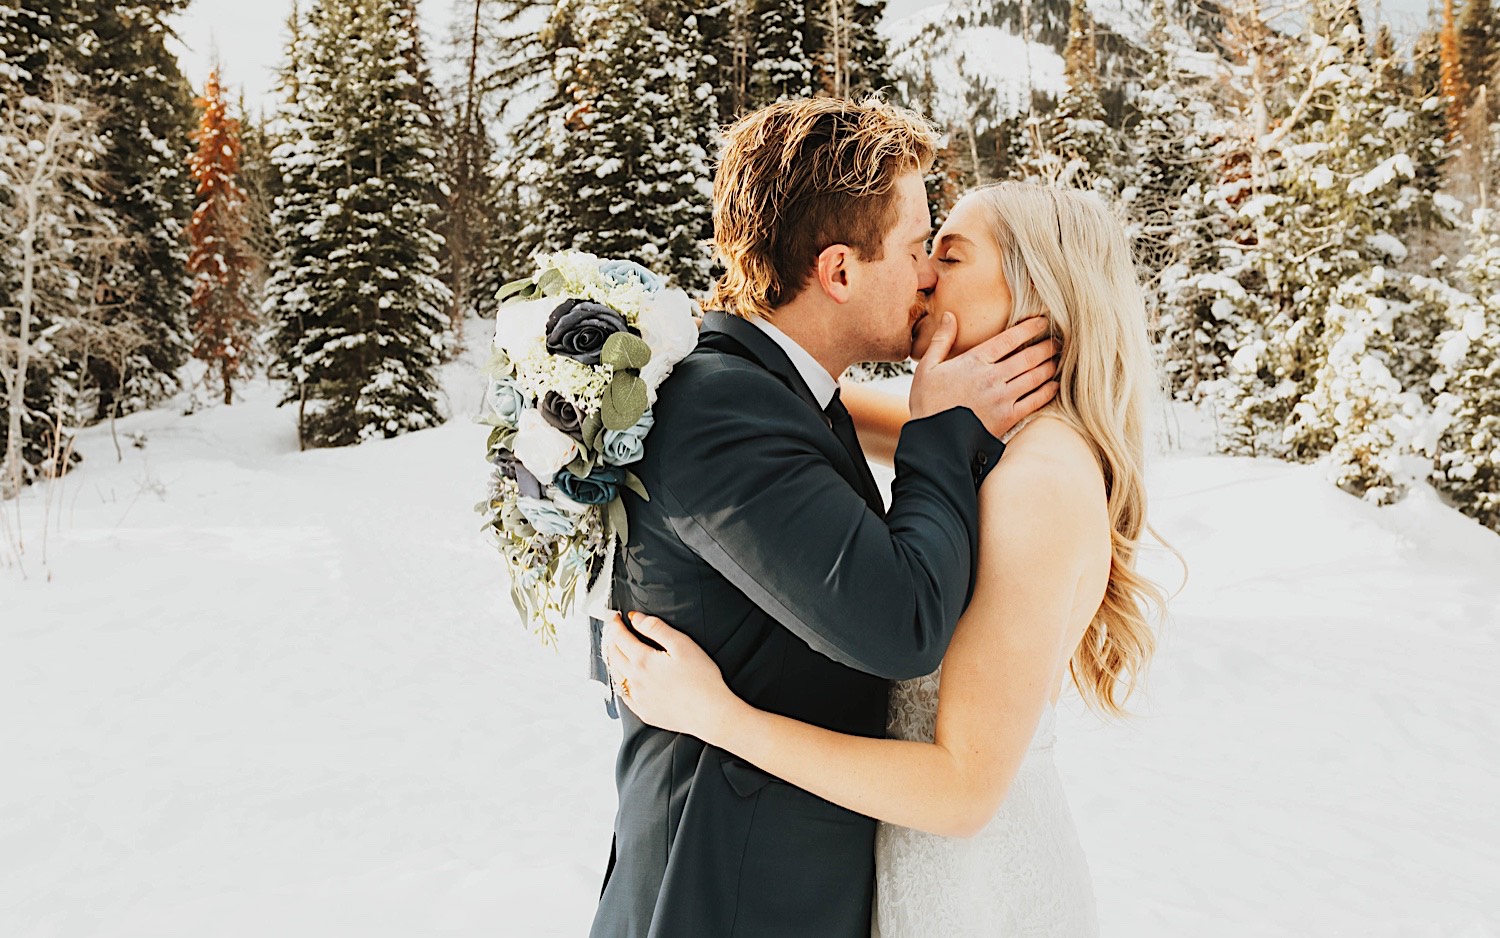 In a snow covered forest near Salt Lake City, a bride and groom kiss one another during their elopement